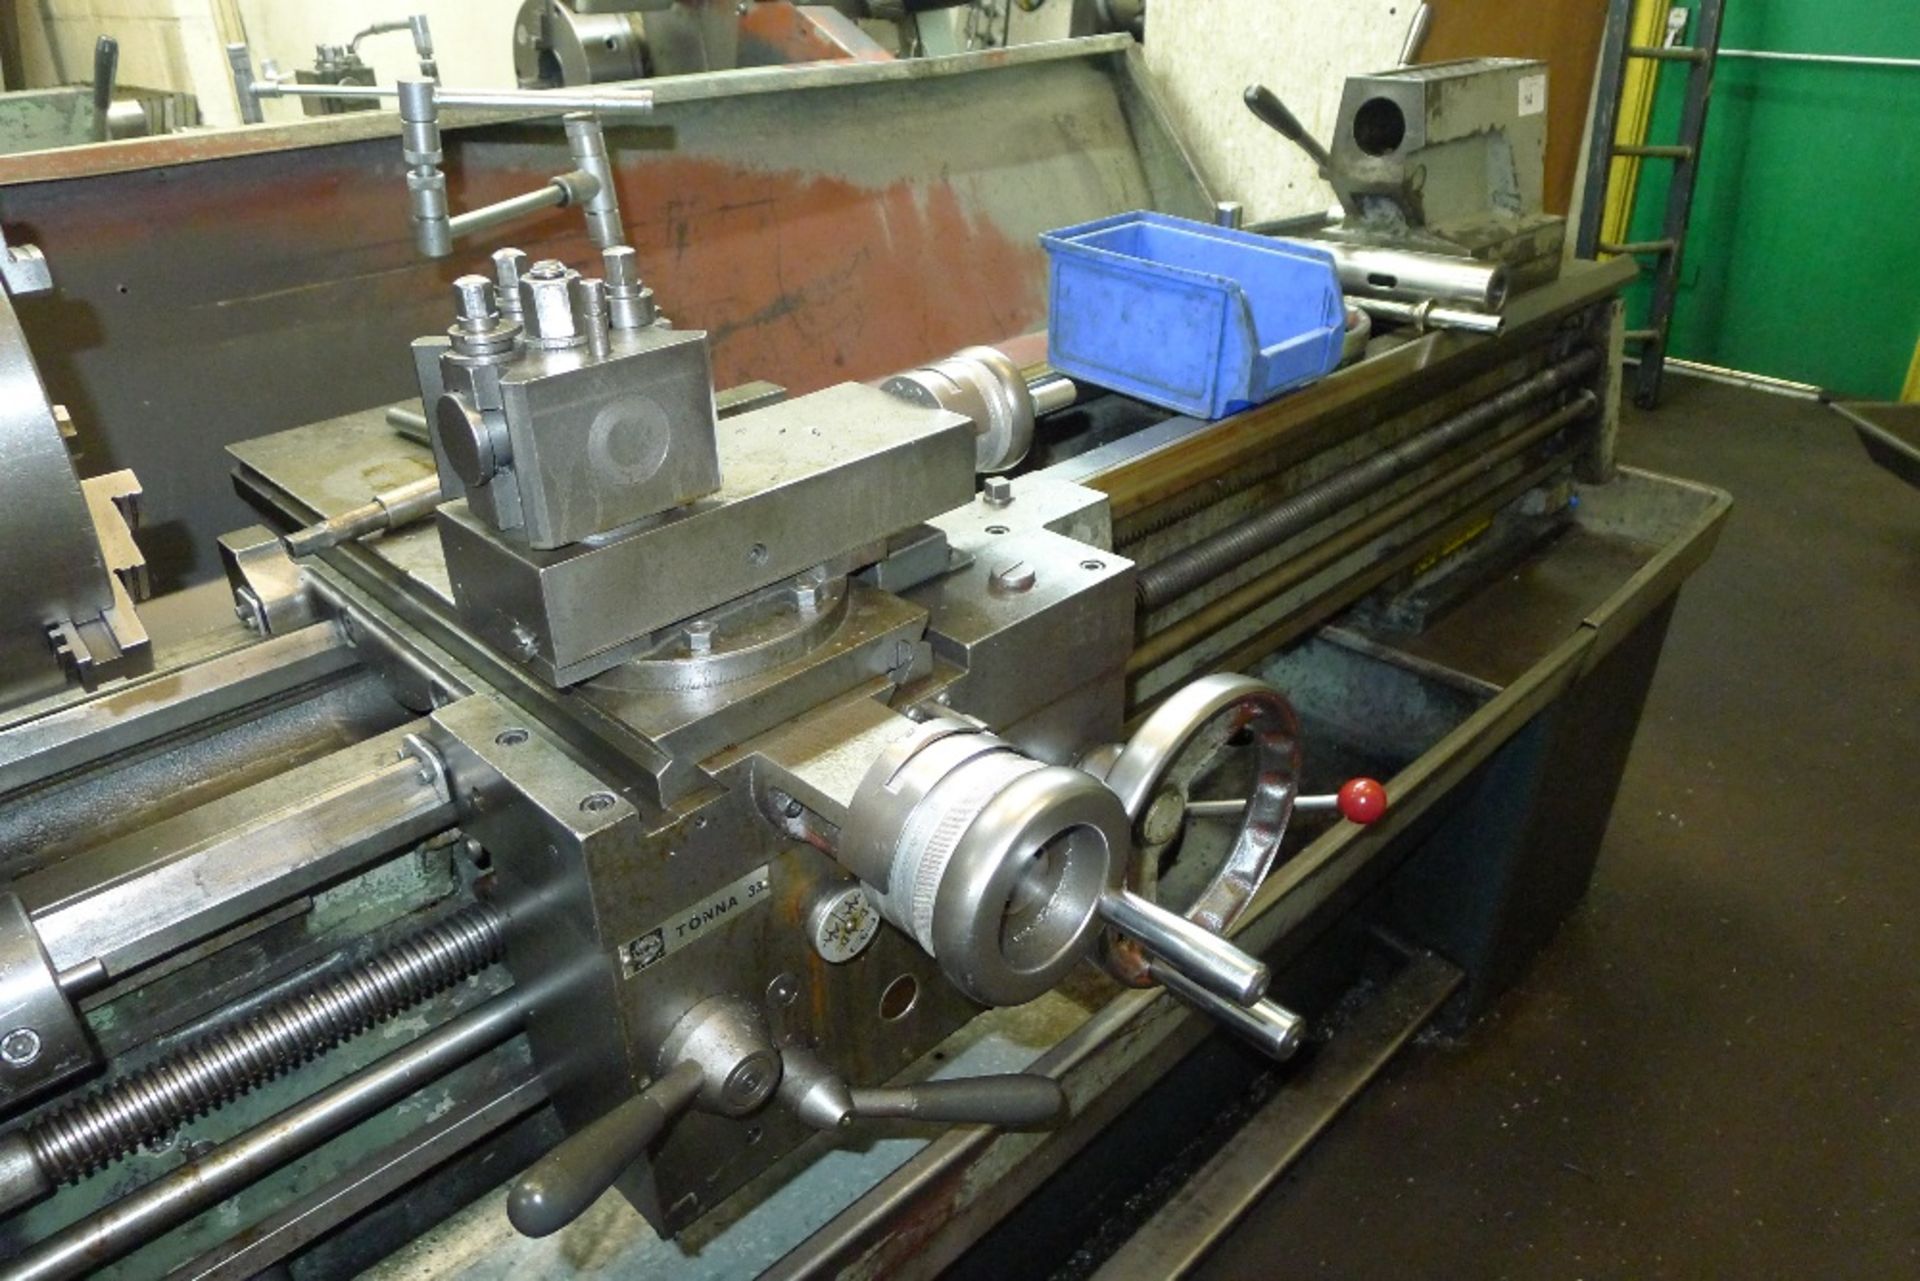 1 Colchester centre lathe type Triumph 2000 serial no. 6/0004/04642, 3ph, overall bed length 1.8m, - Image 3 of 8